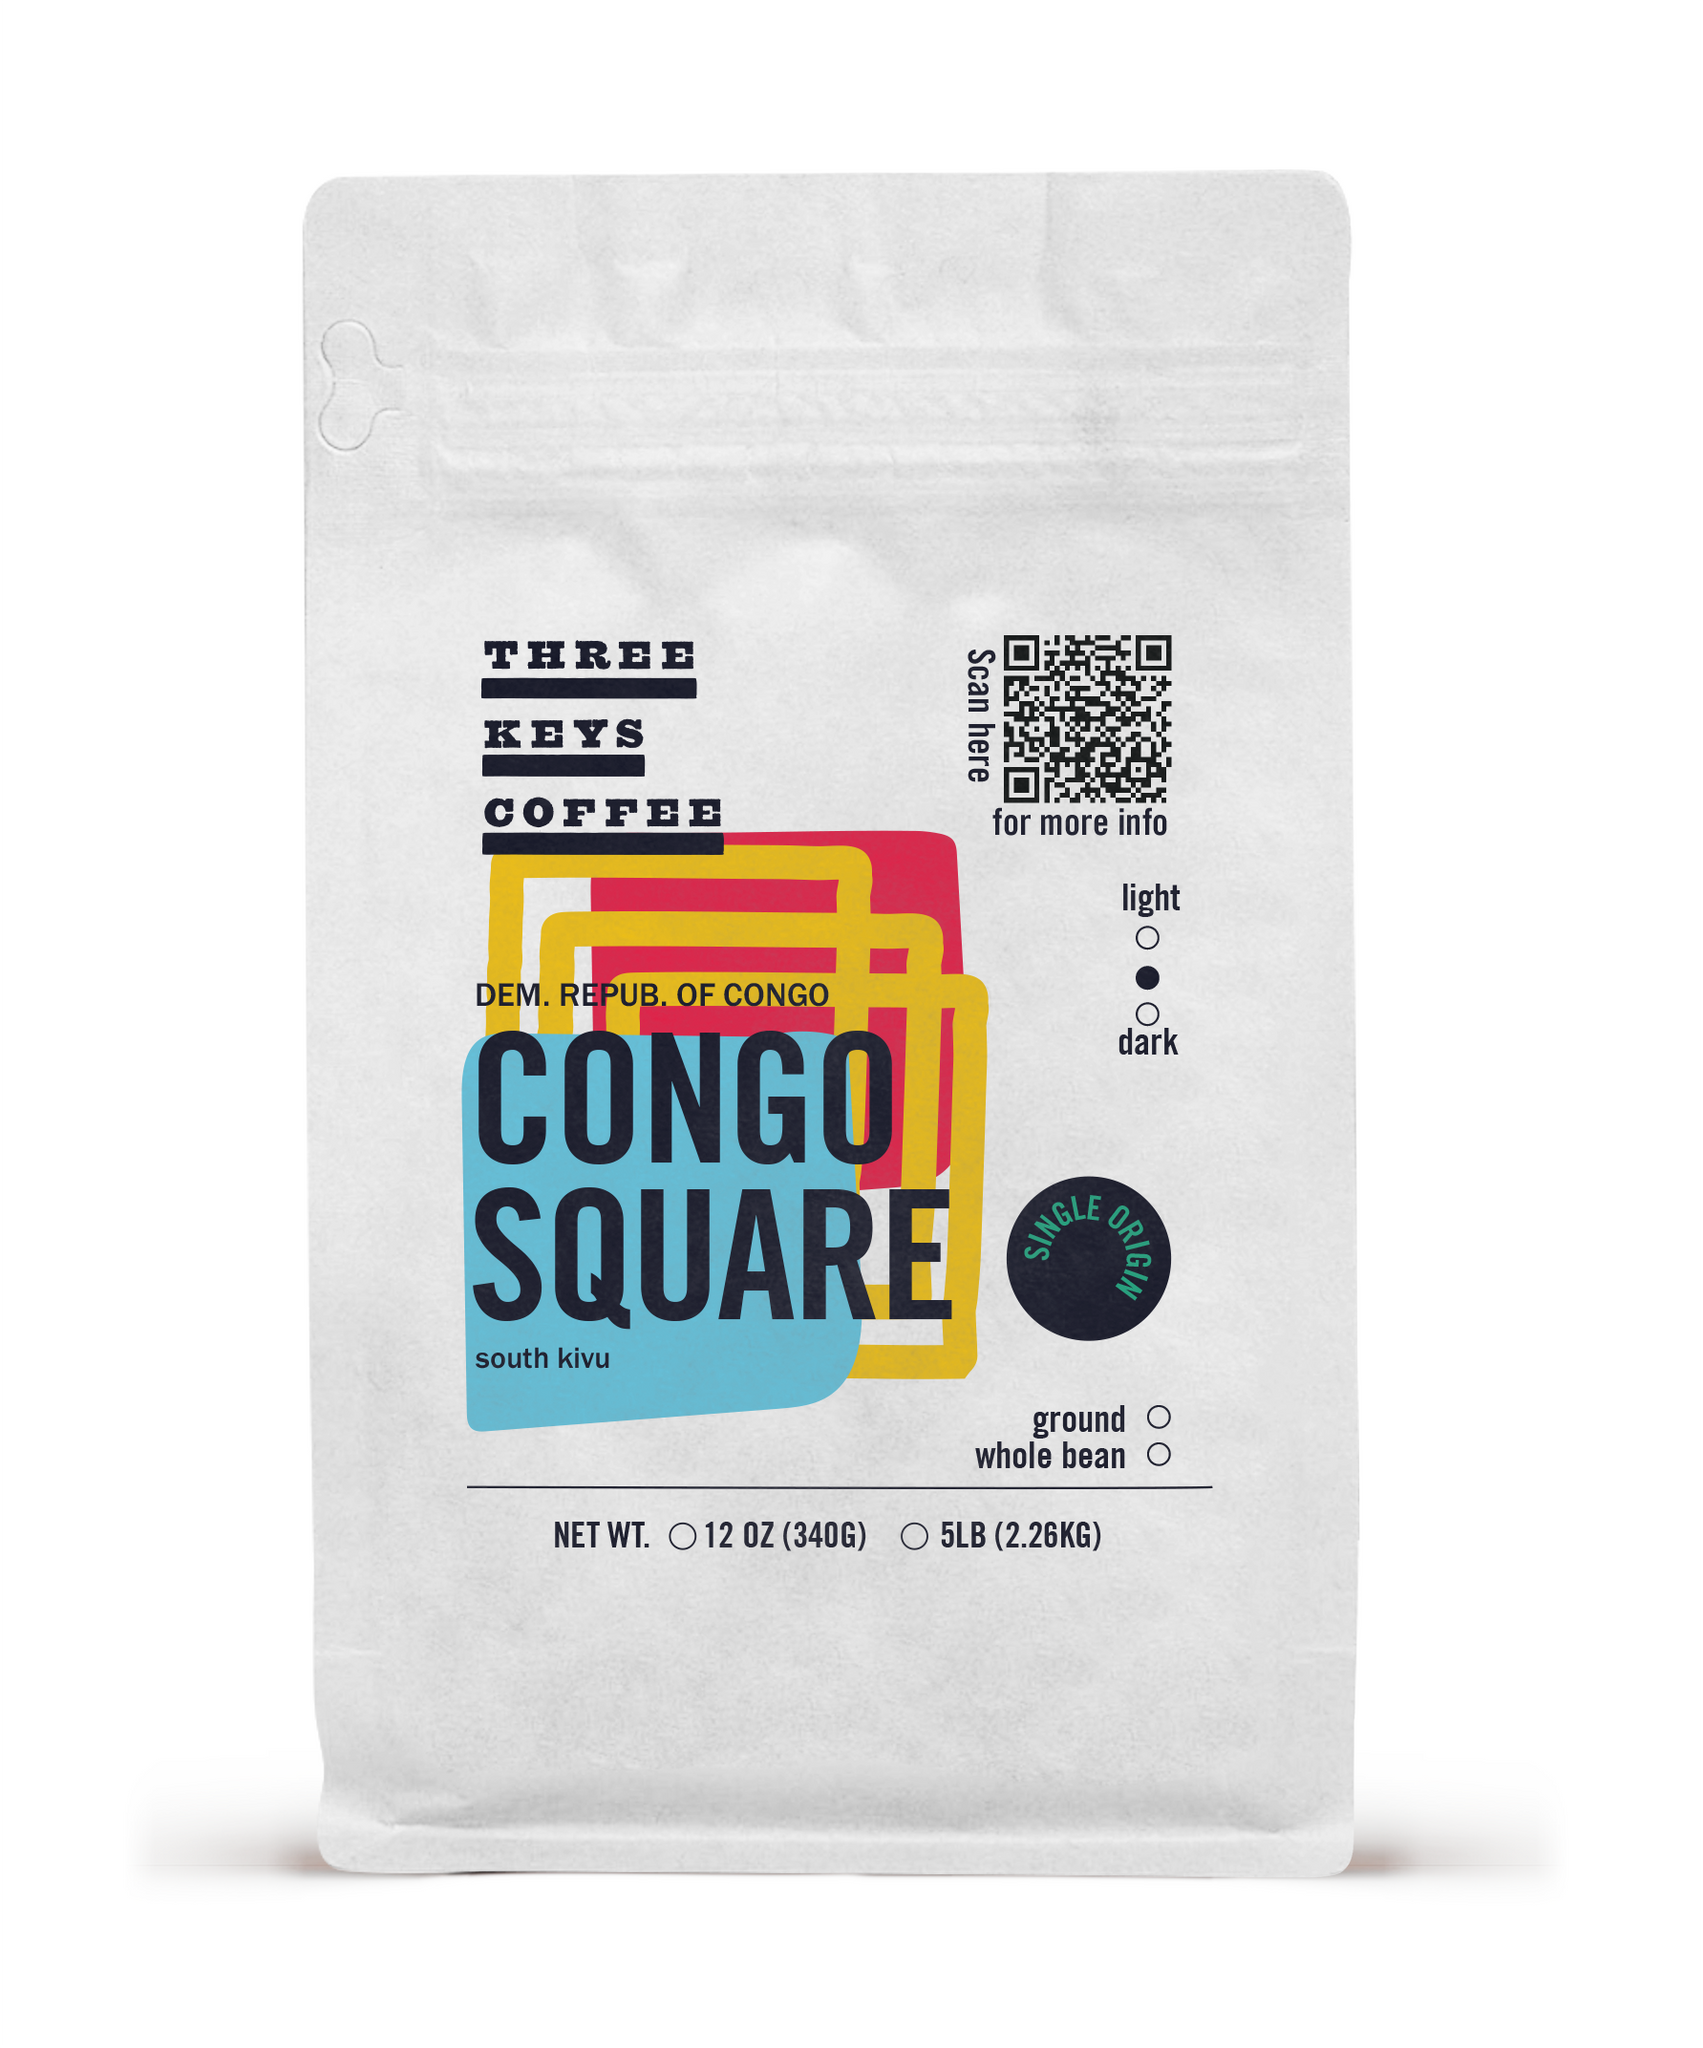 DRC Washed - "Congo Square" (Wholesale)